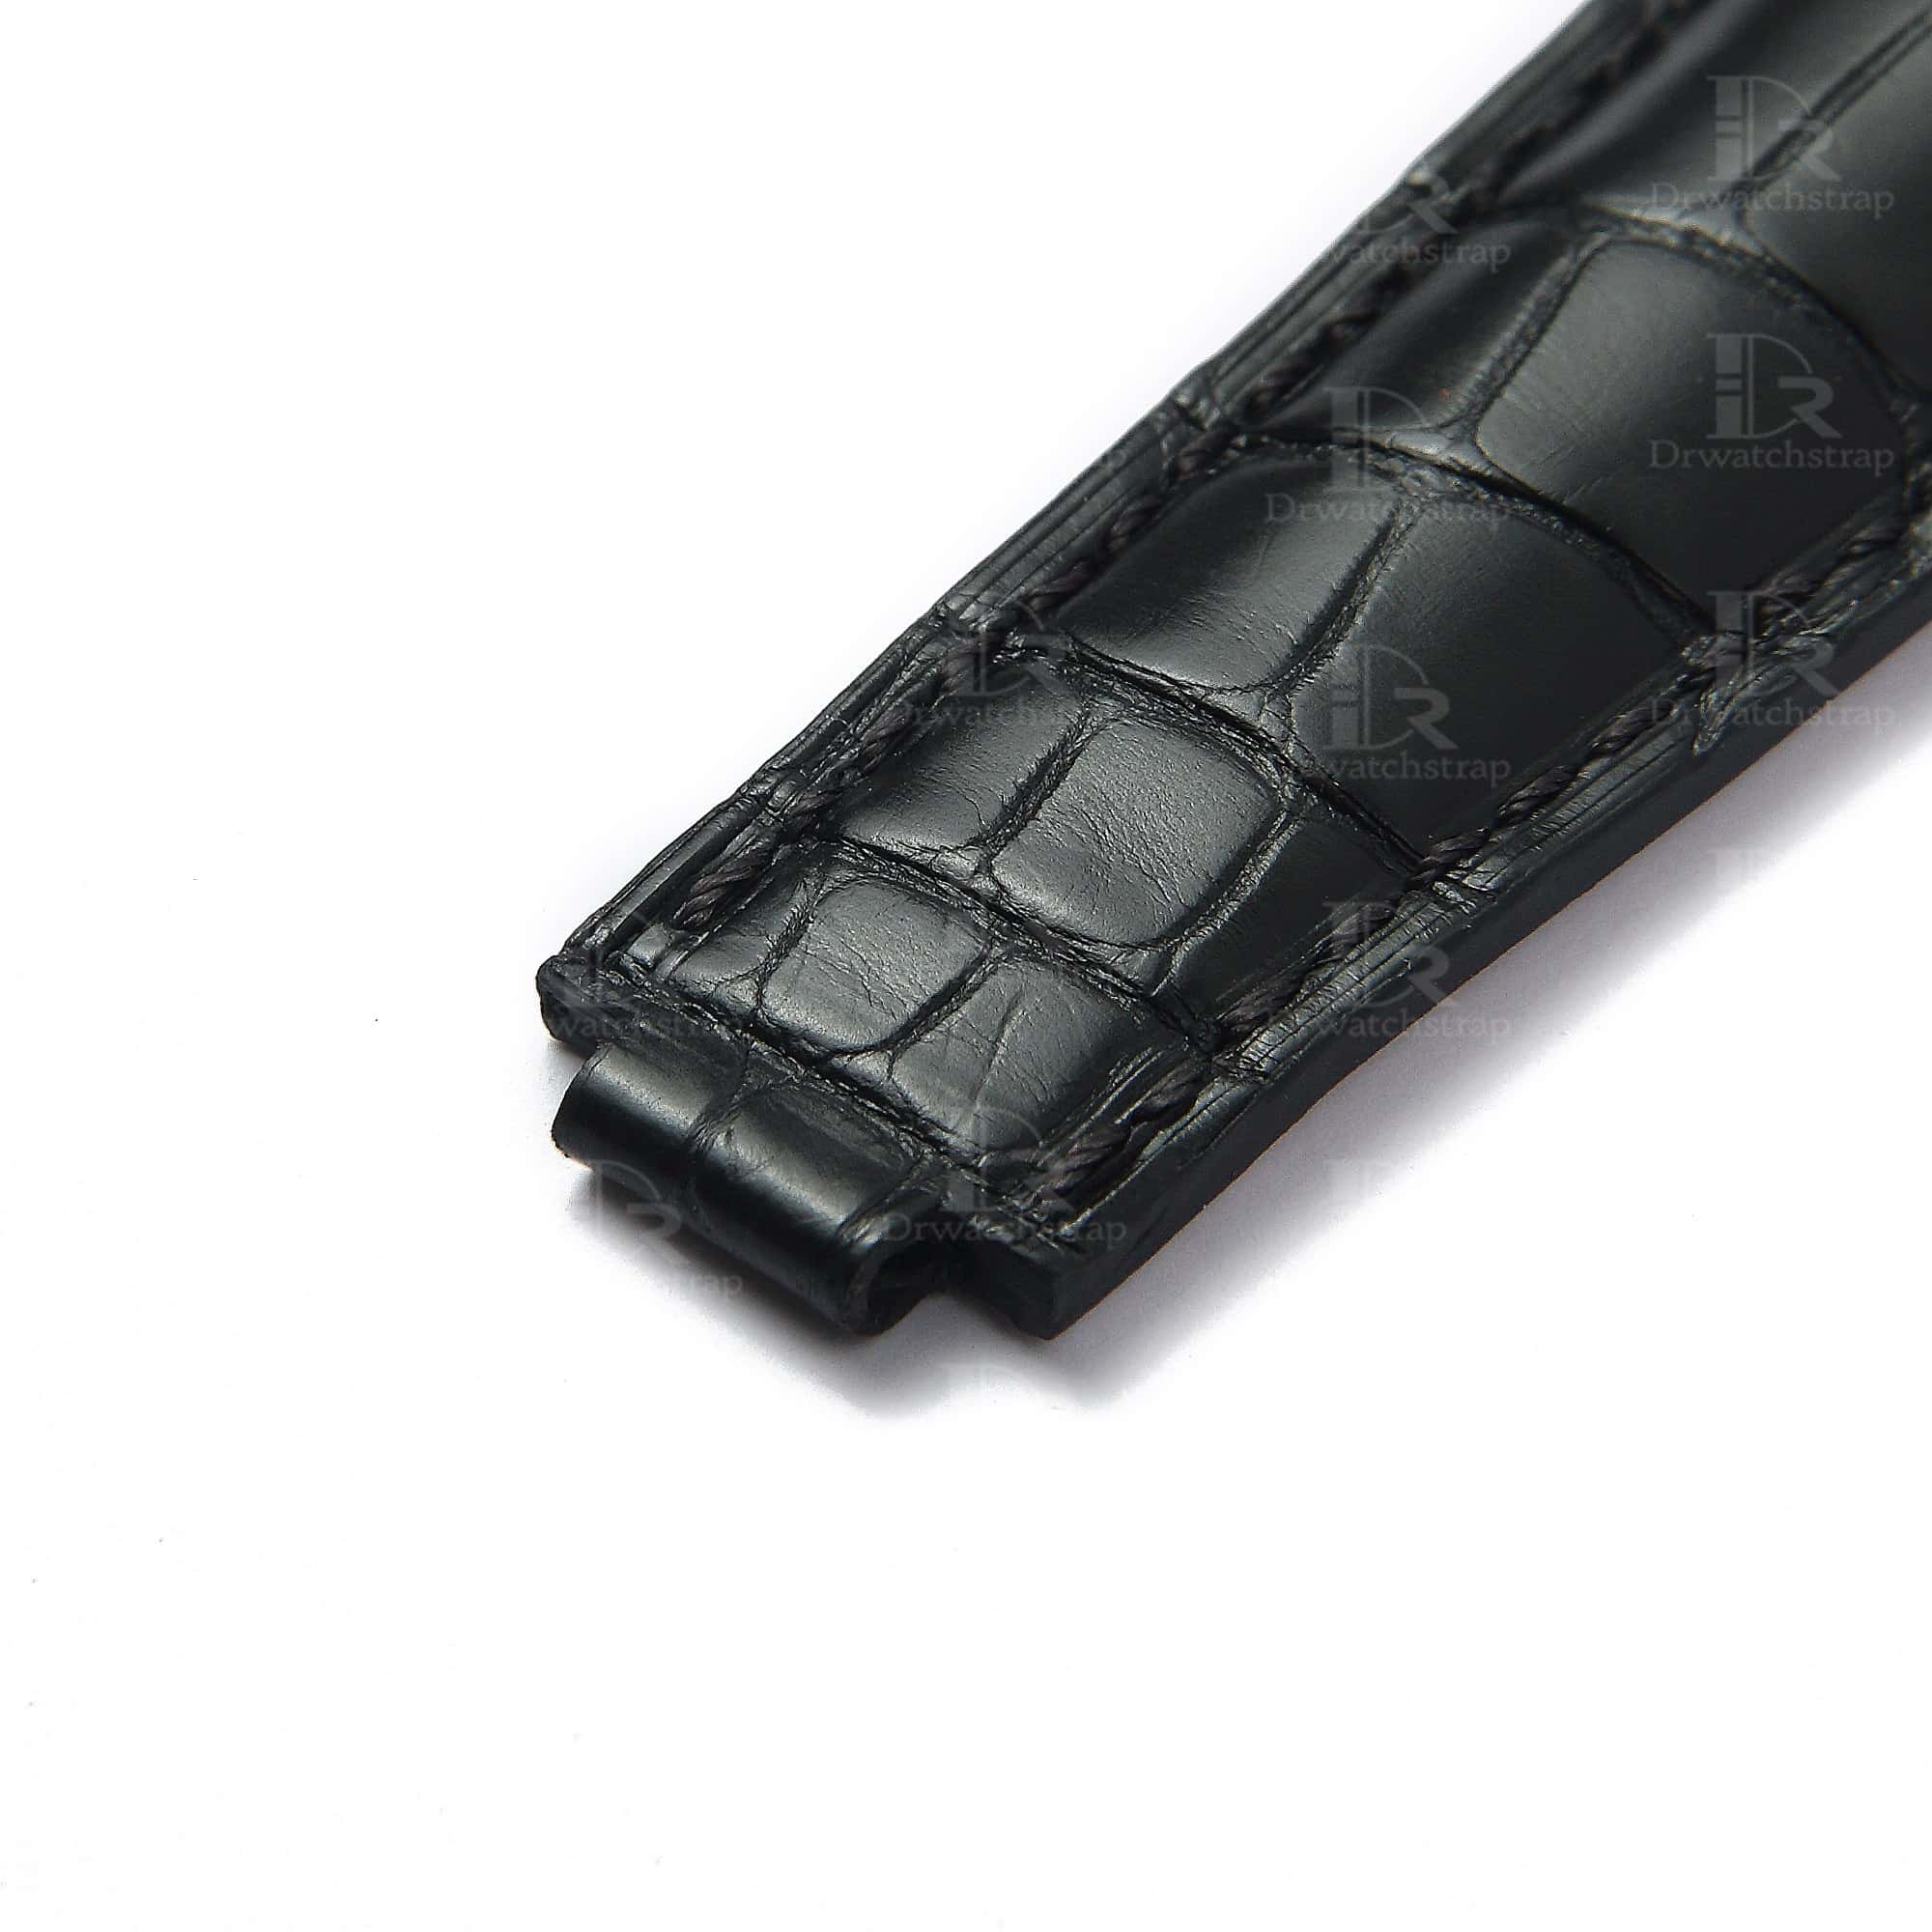 Best high-end quality alligator black Rolex leather watch straps and watch bands replacement for Rolex Submariner & Sky-Dweller luxury watches - Aftermarket watch band online for sale at a low price 20mm 21mm 22mm lug size